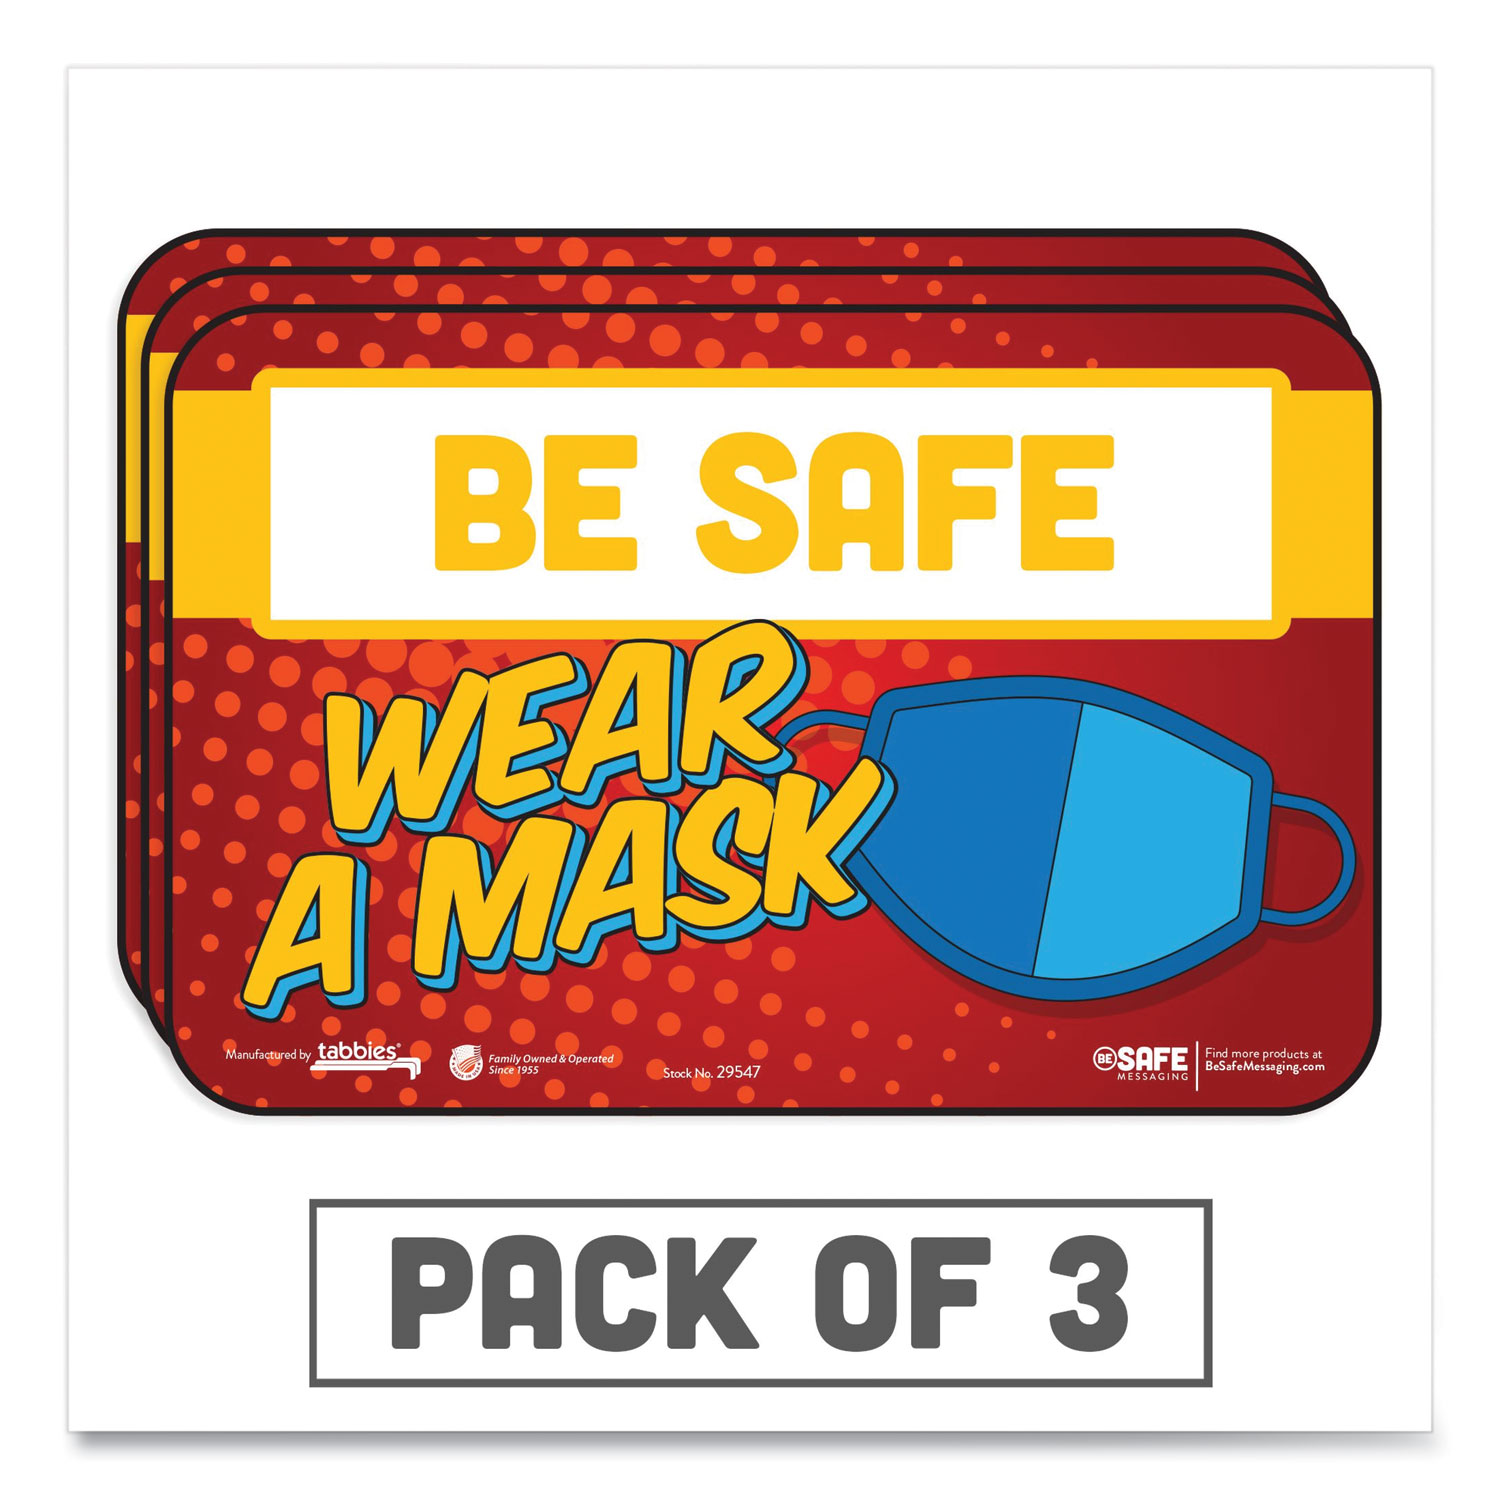  Tabbies 29547 BeSafe Messaging Education Wall Signs, 9 x 6,  Be Safe, Wear A Mask, 3/Pack (TAB29547) 